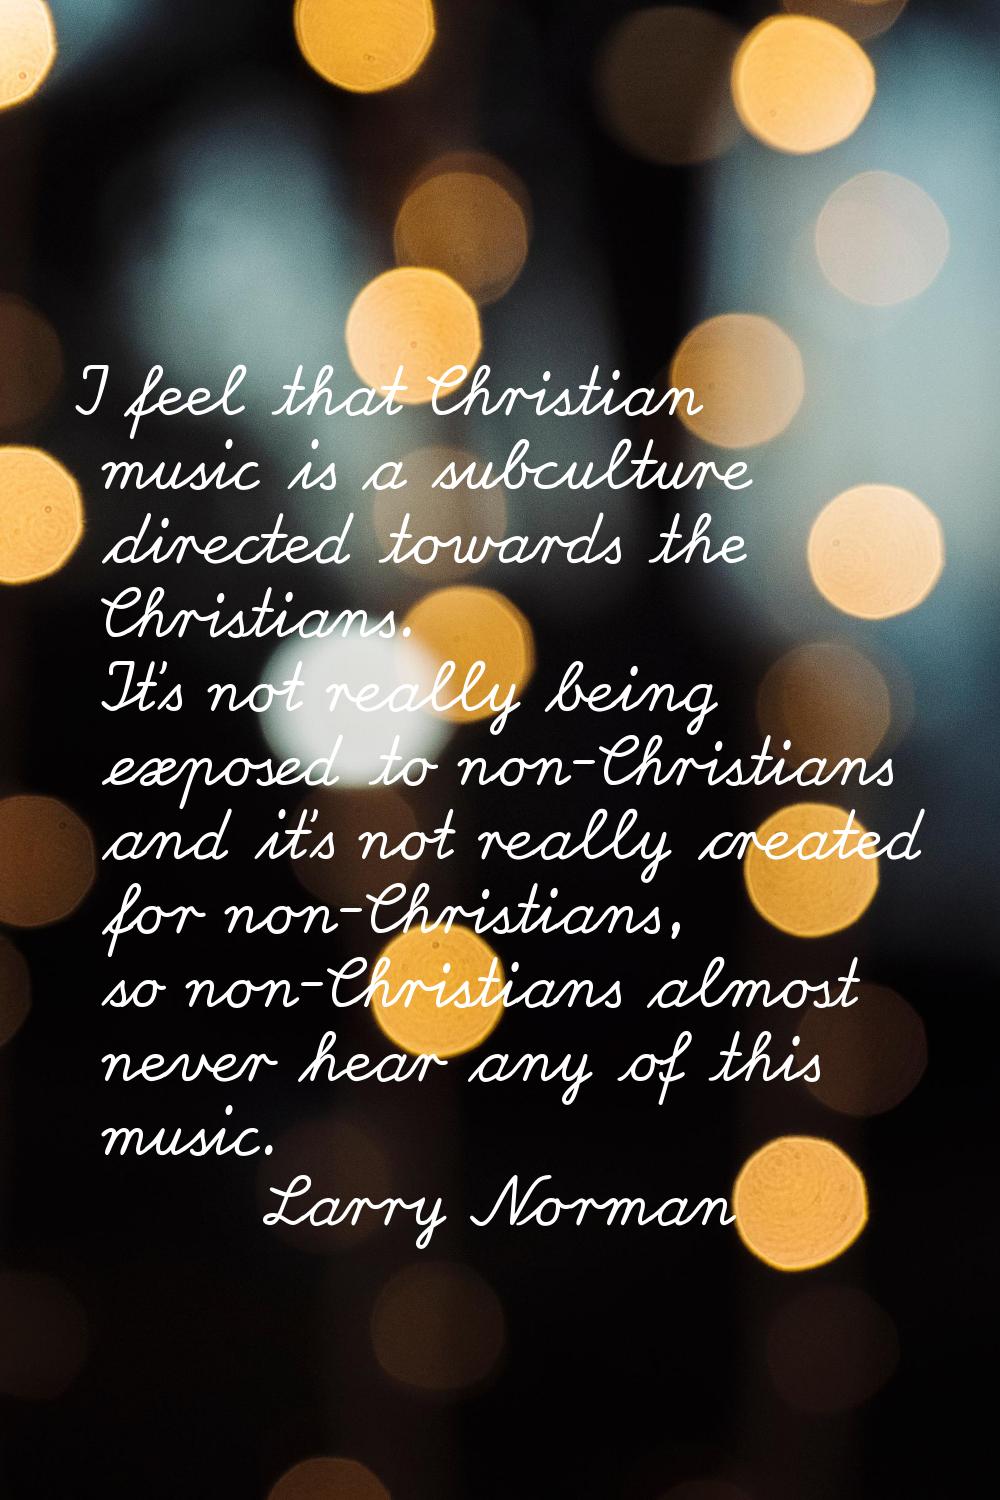 I feel that Christian music is a subculture directed towards the Christians. It's not really being 